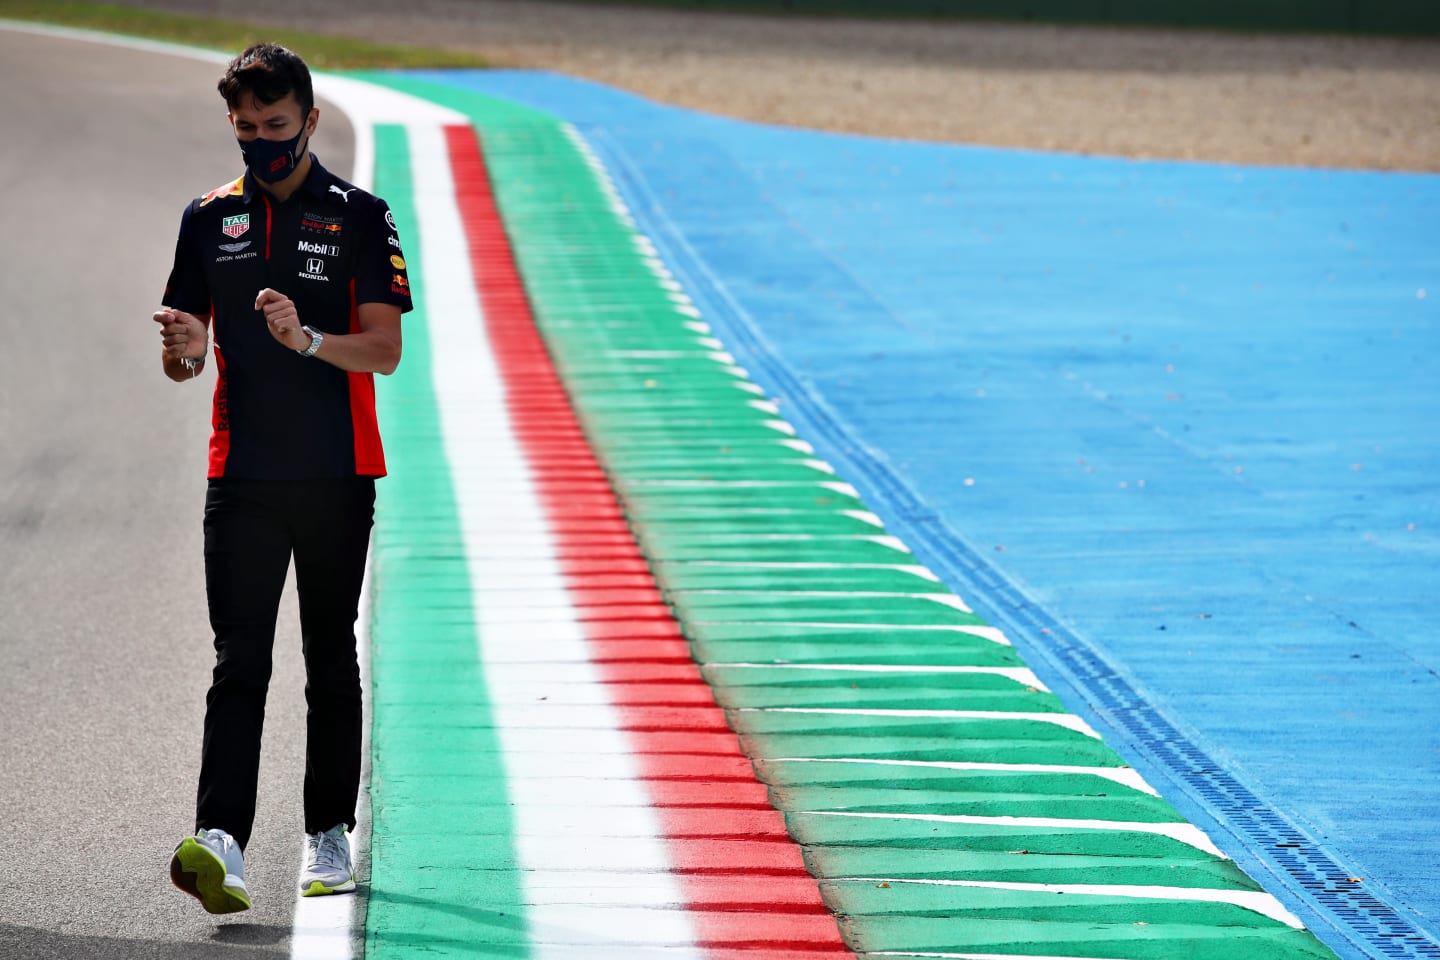 IMOLA, ITALY - OCTOBER 30: Alexander Albon of Thailand and Red Bull Racing walks the track during